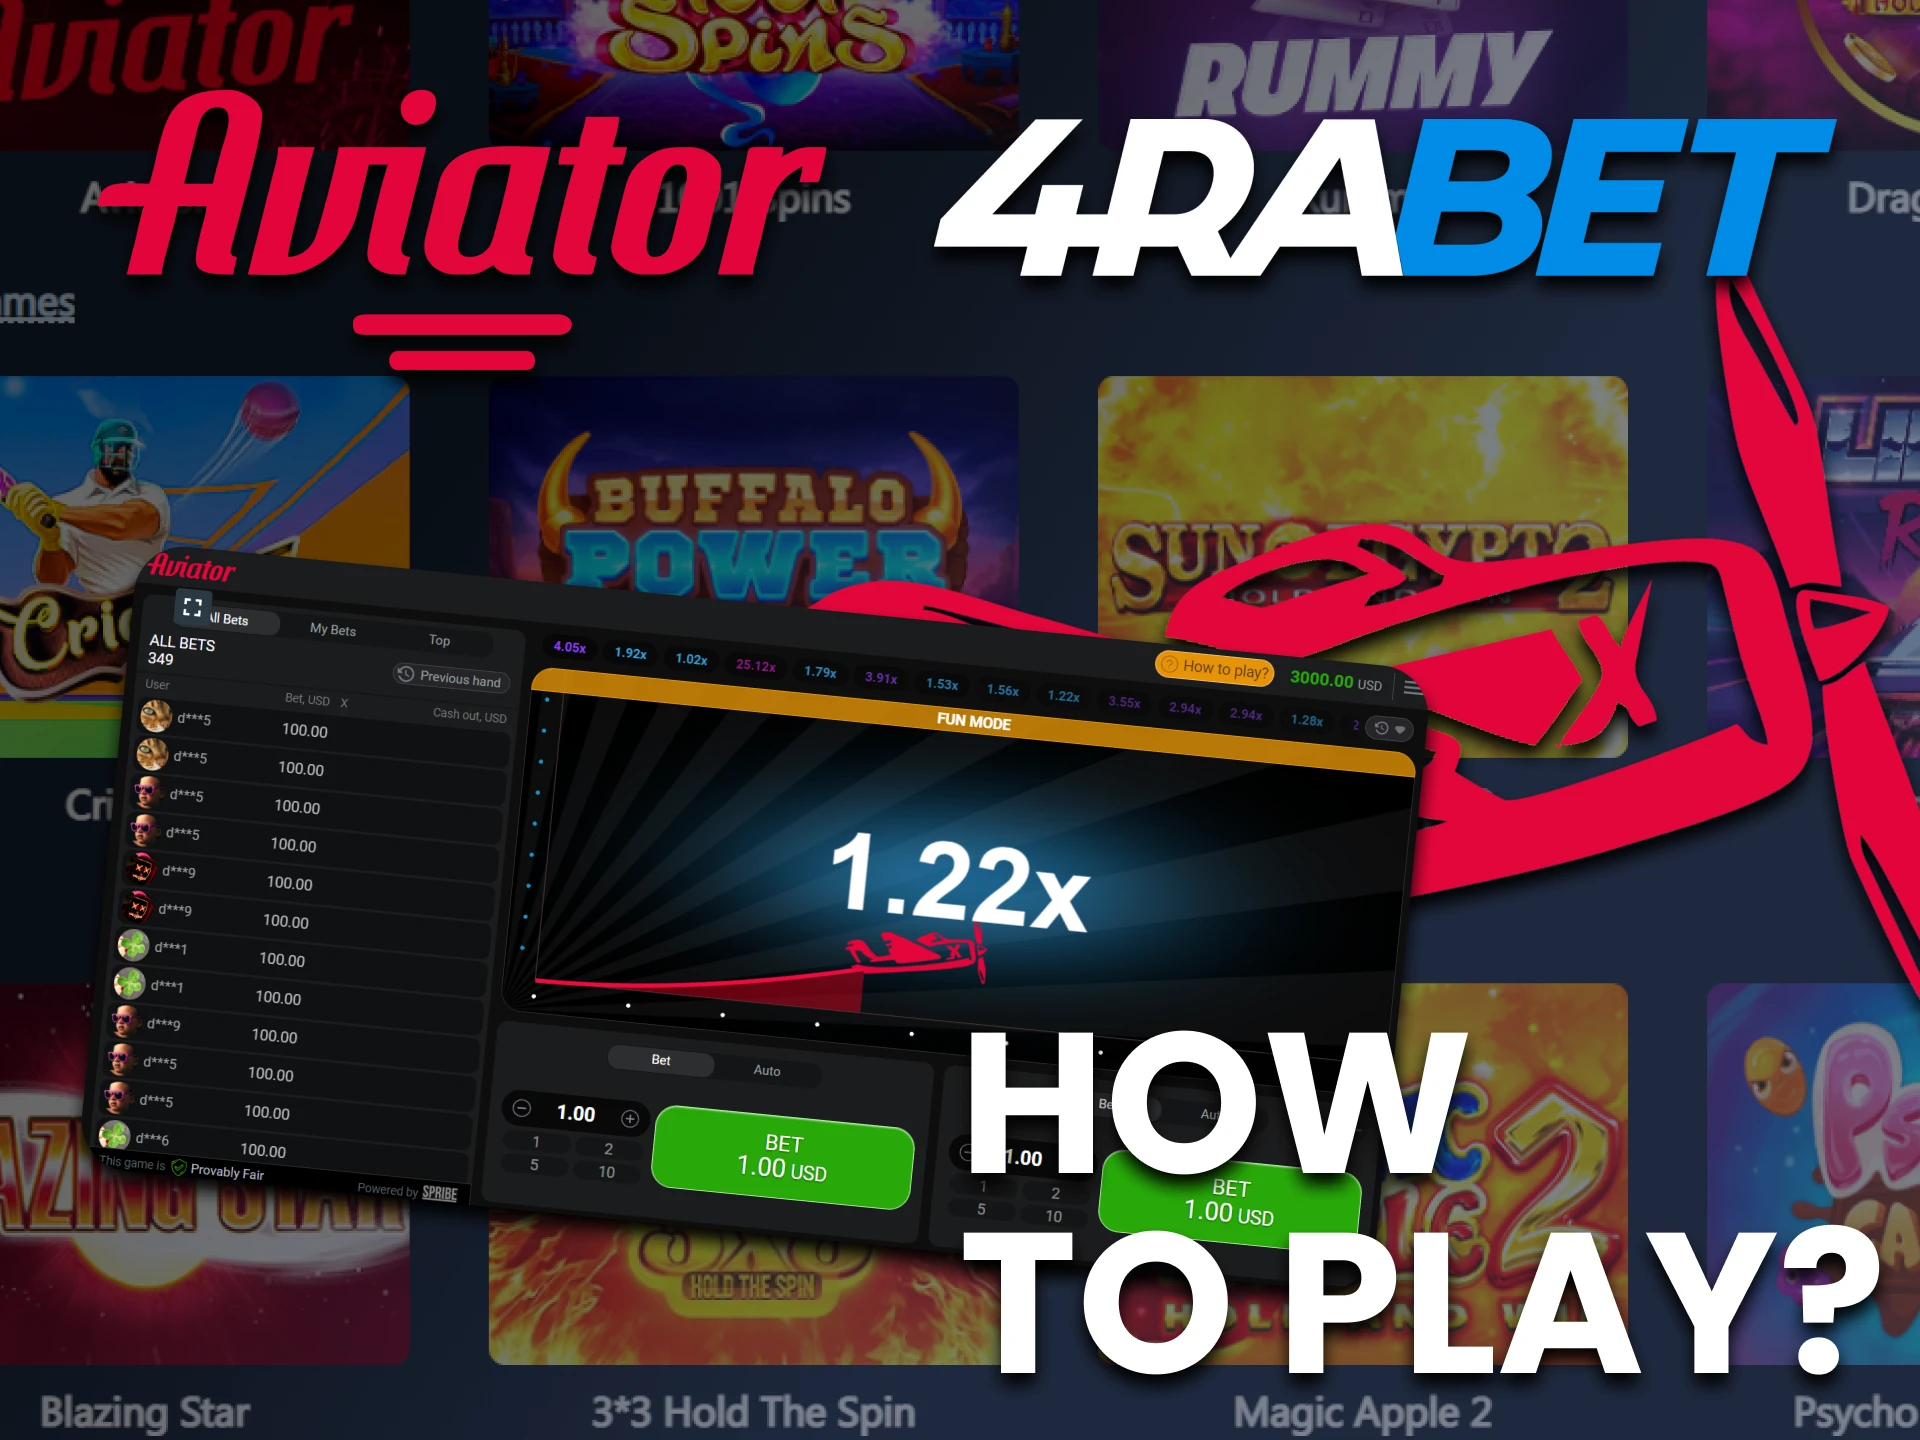 Launch the Aviator game in the 4rabet online casino.